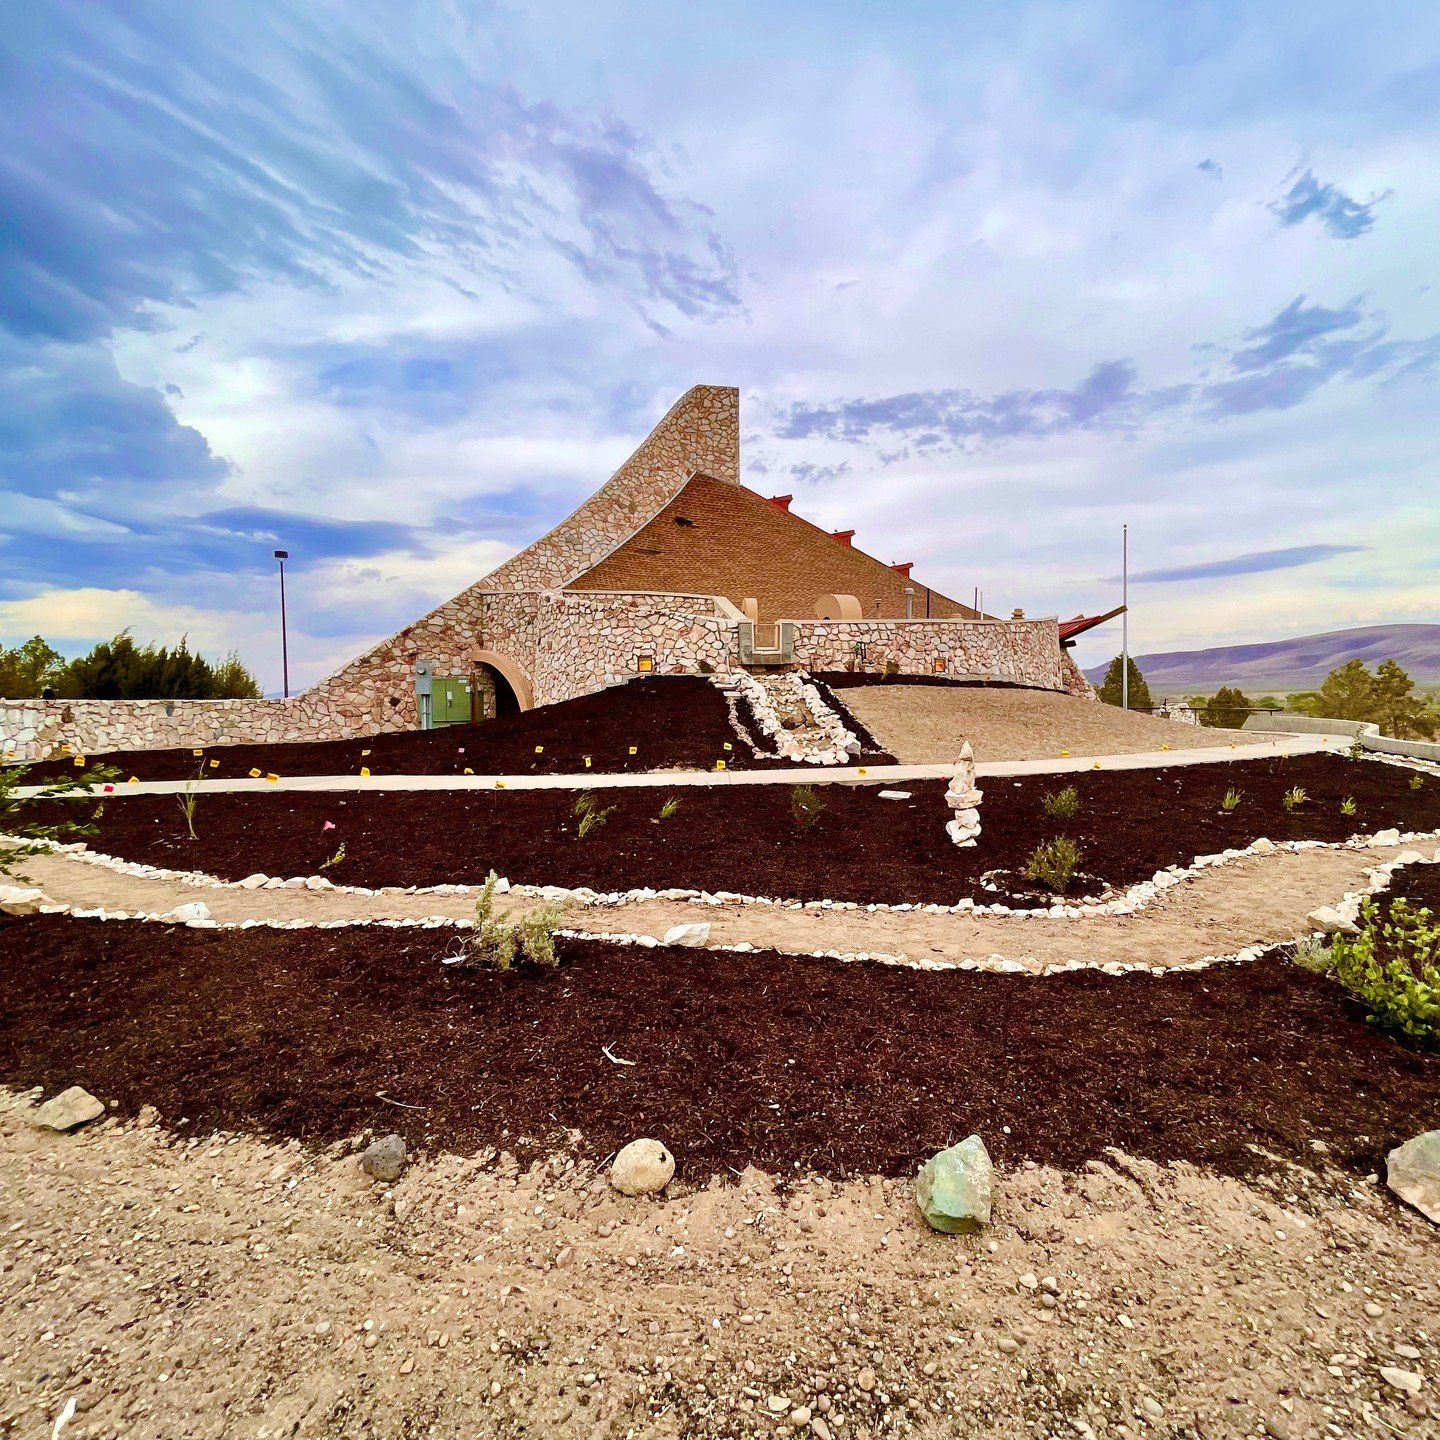 Back in May '22, the Ripple Project team set out to the Pyramid Lake Paiute Museum to install a native plant garden! The intention stemmed from a desire to preserve and educate people on the uses of native plants and their importance to the people th